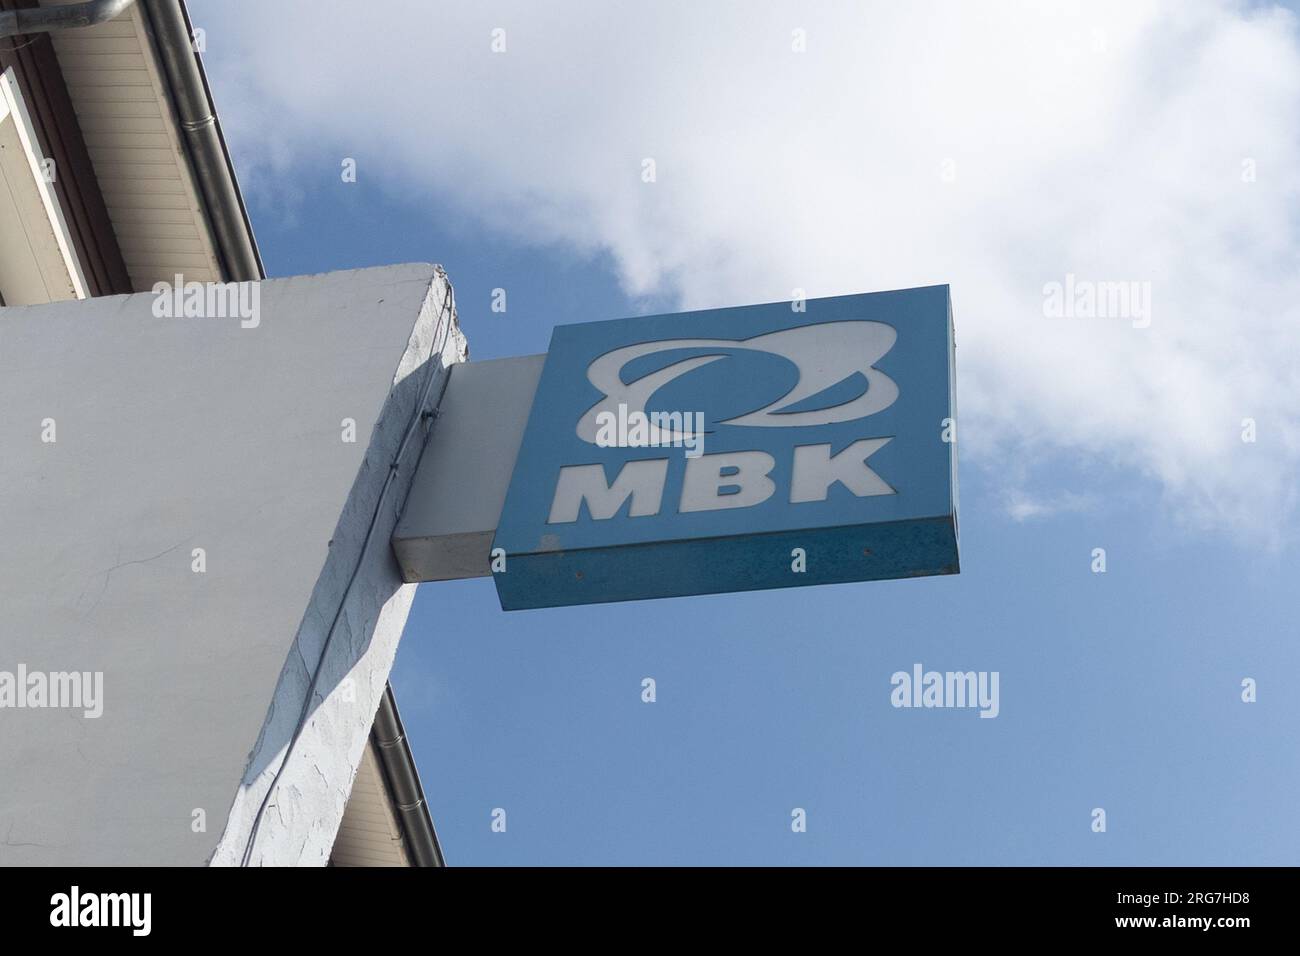 Bordeaux , France -  08 07 2023 : MBK motobecane moped text sign and brand logo on shop scooter facade Stock Photo